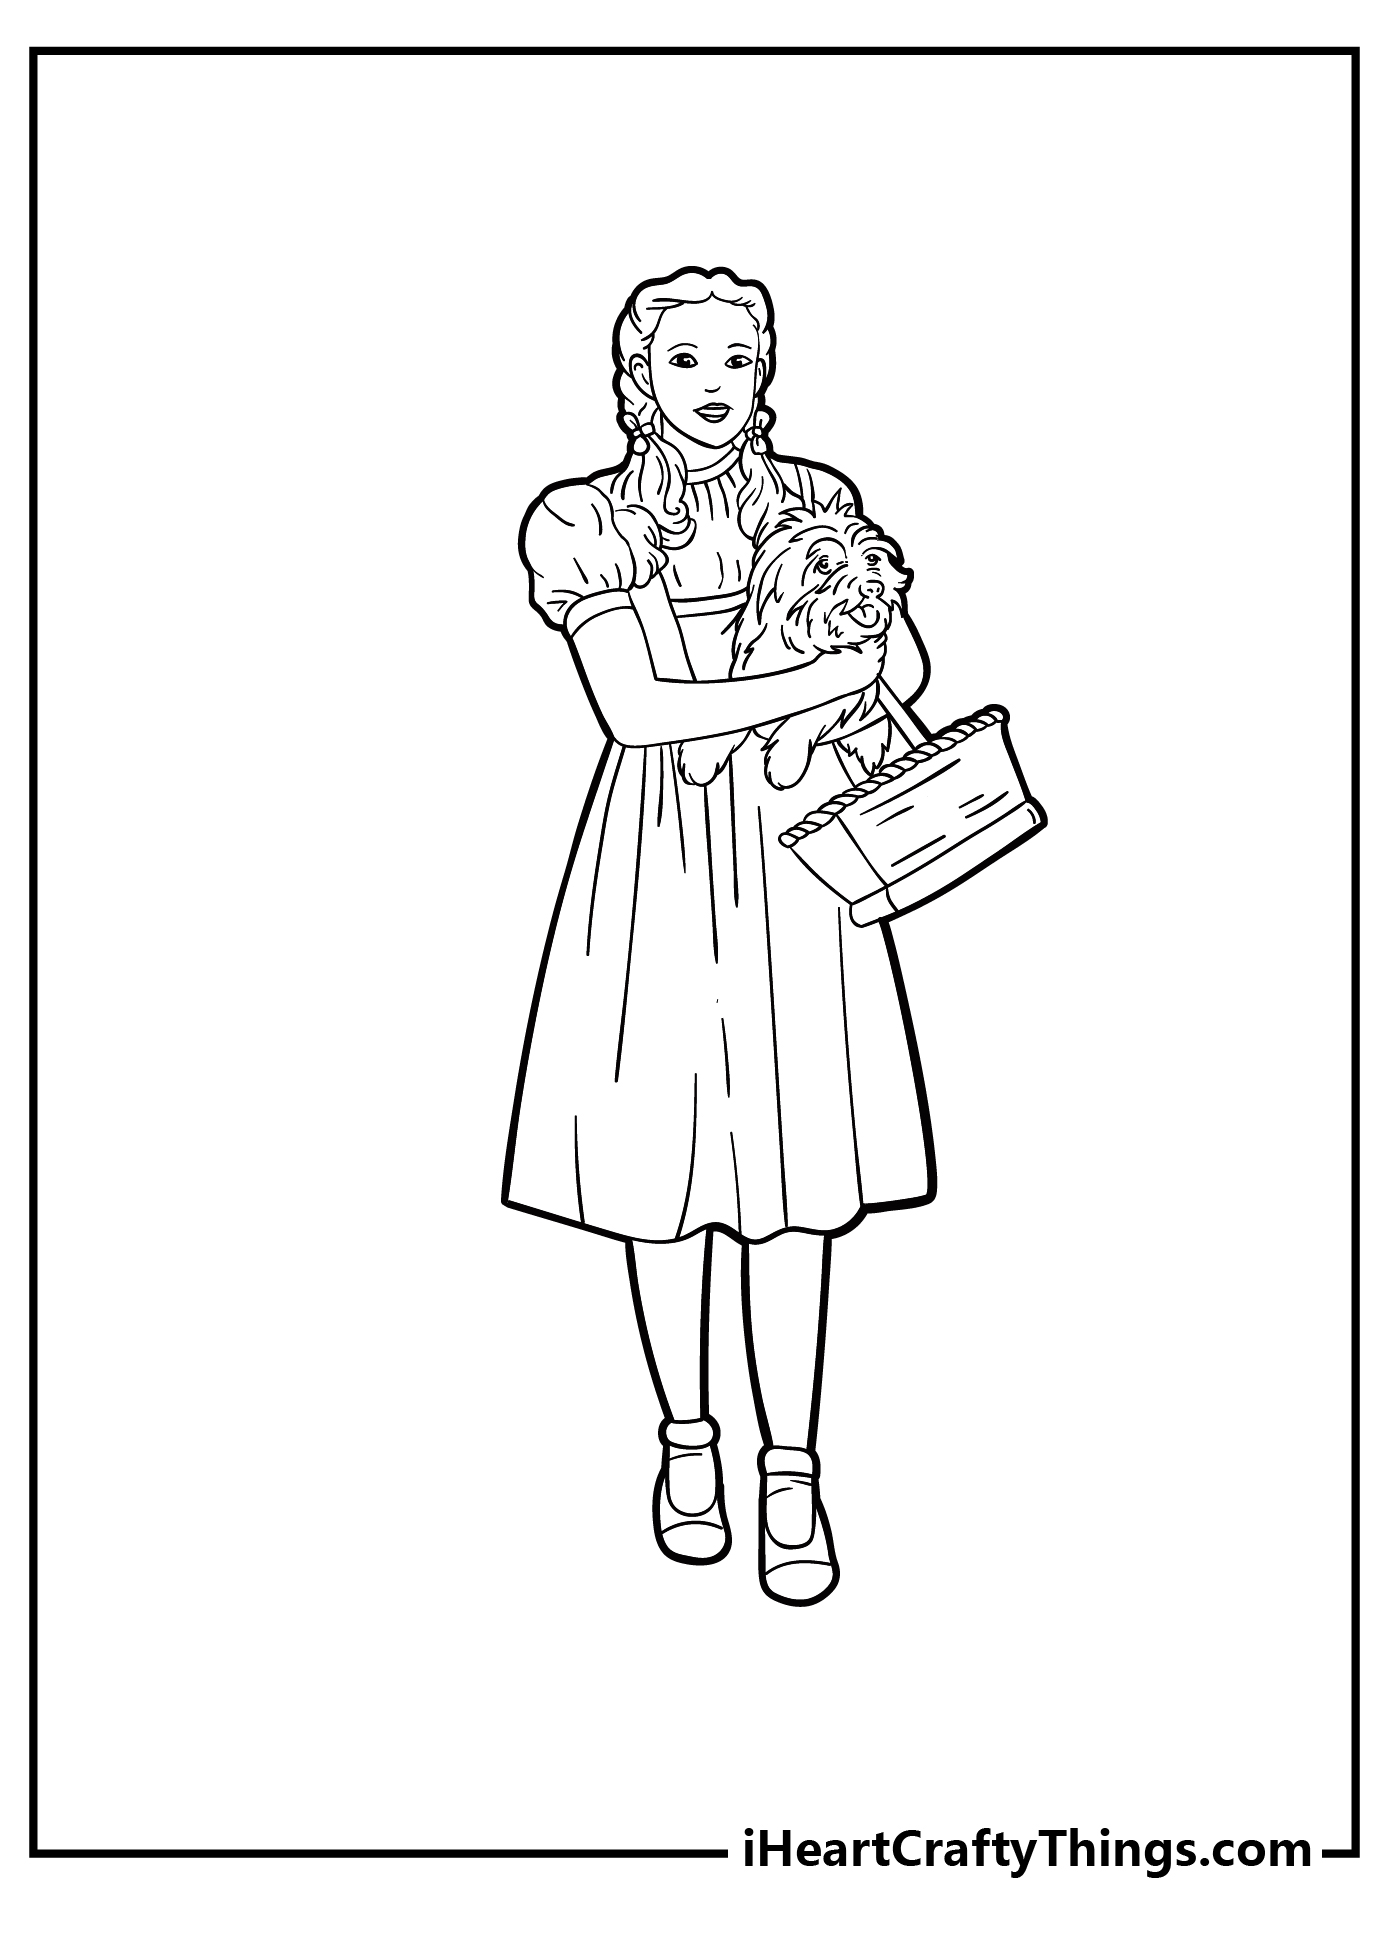 Wizard Of Oz Coloring Pages for kids free download